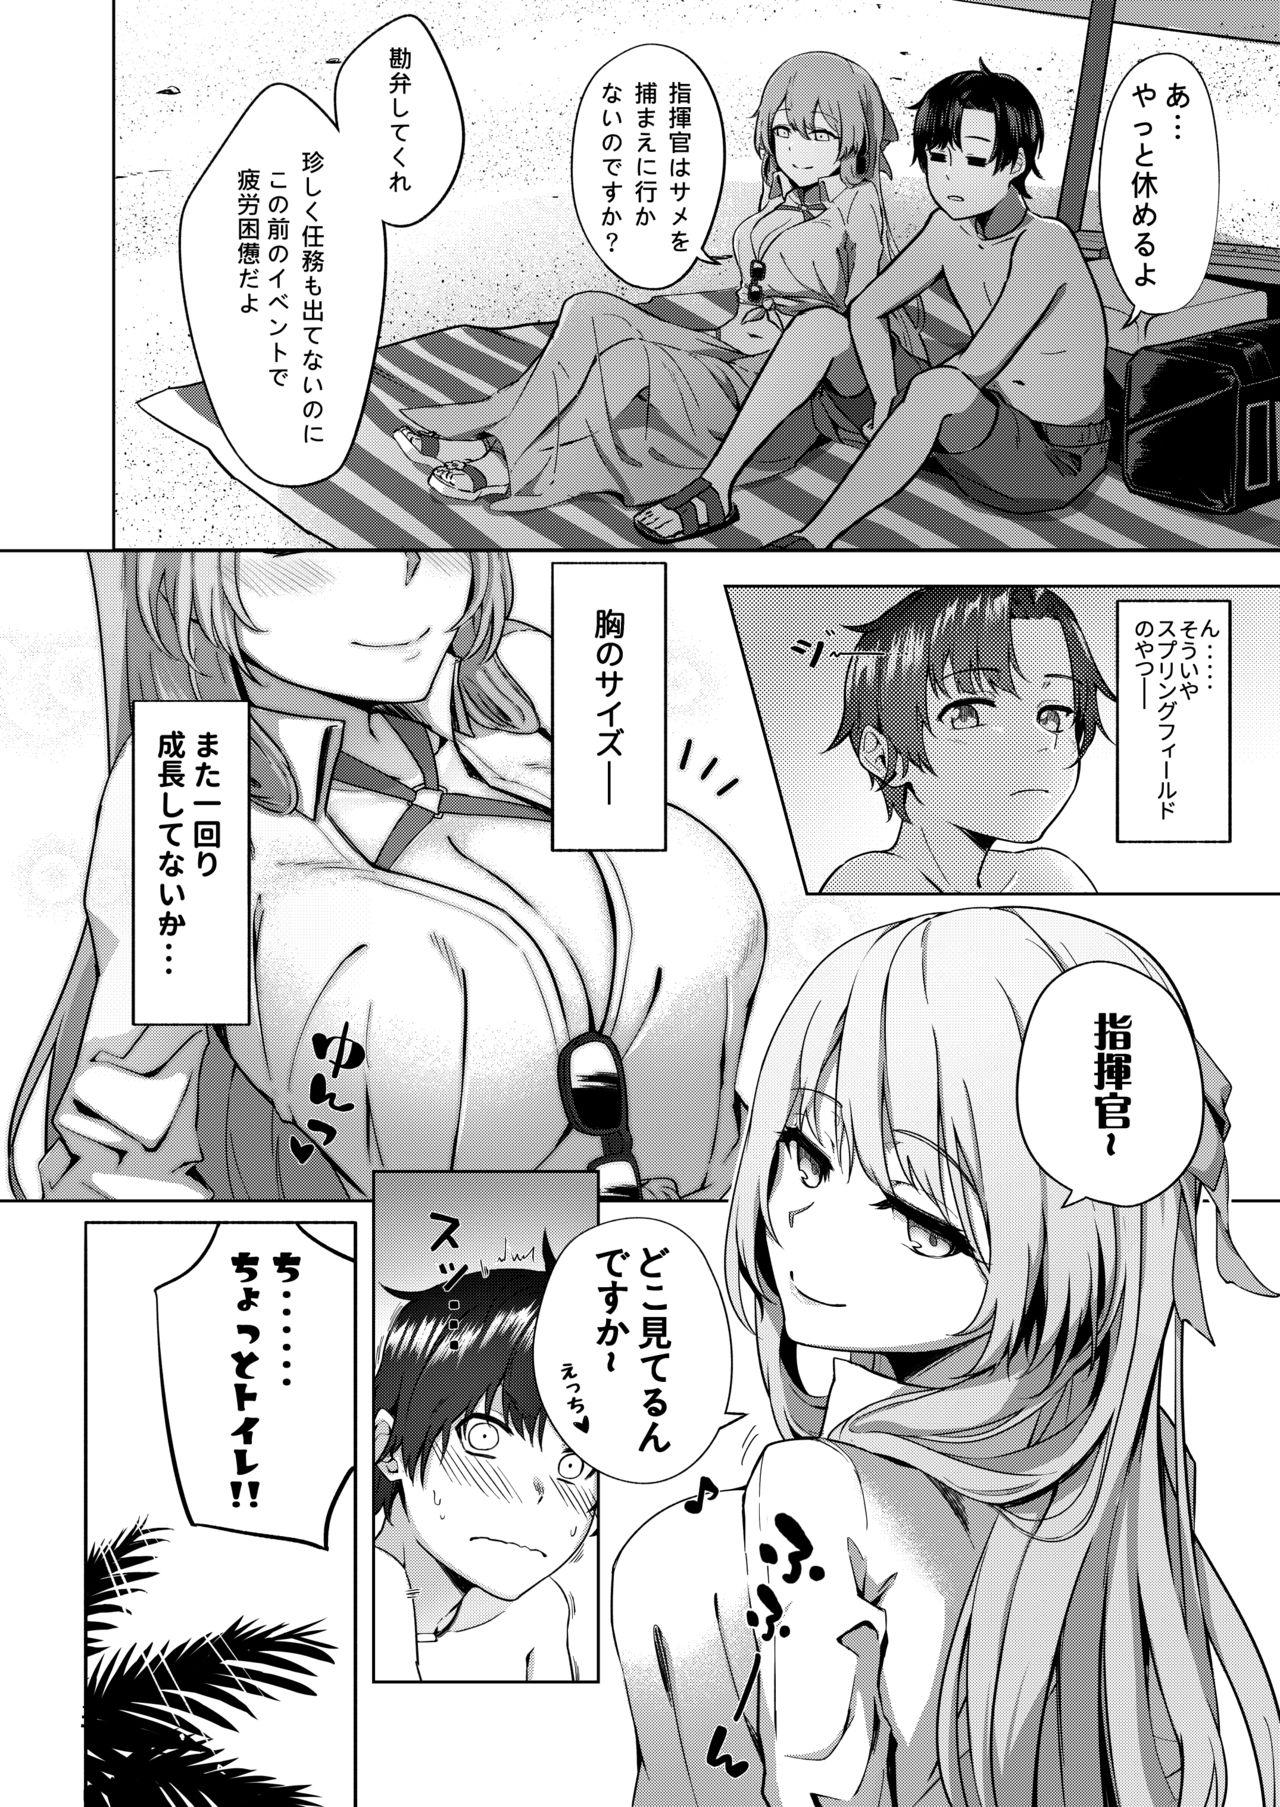 Dicksucking Field on Fire - Girls frontline Hot Couple Sex - Page 4